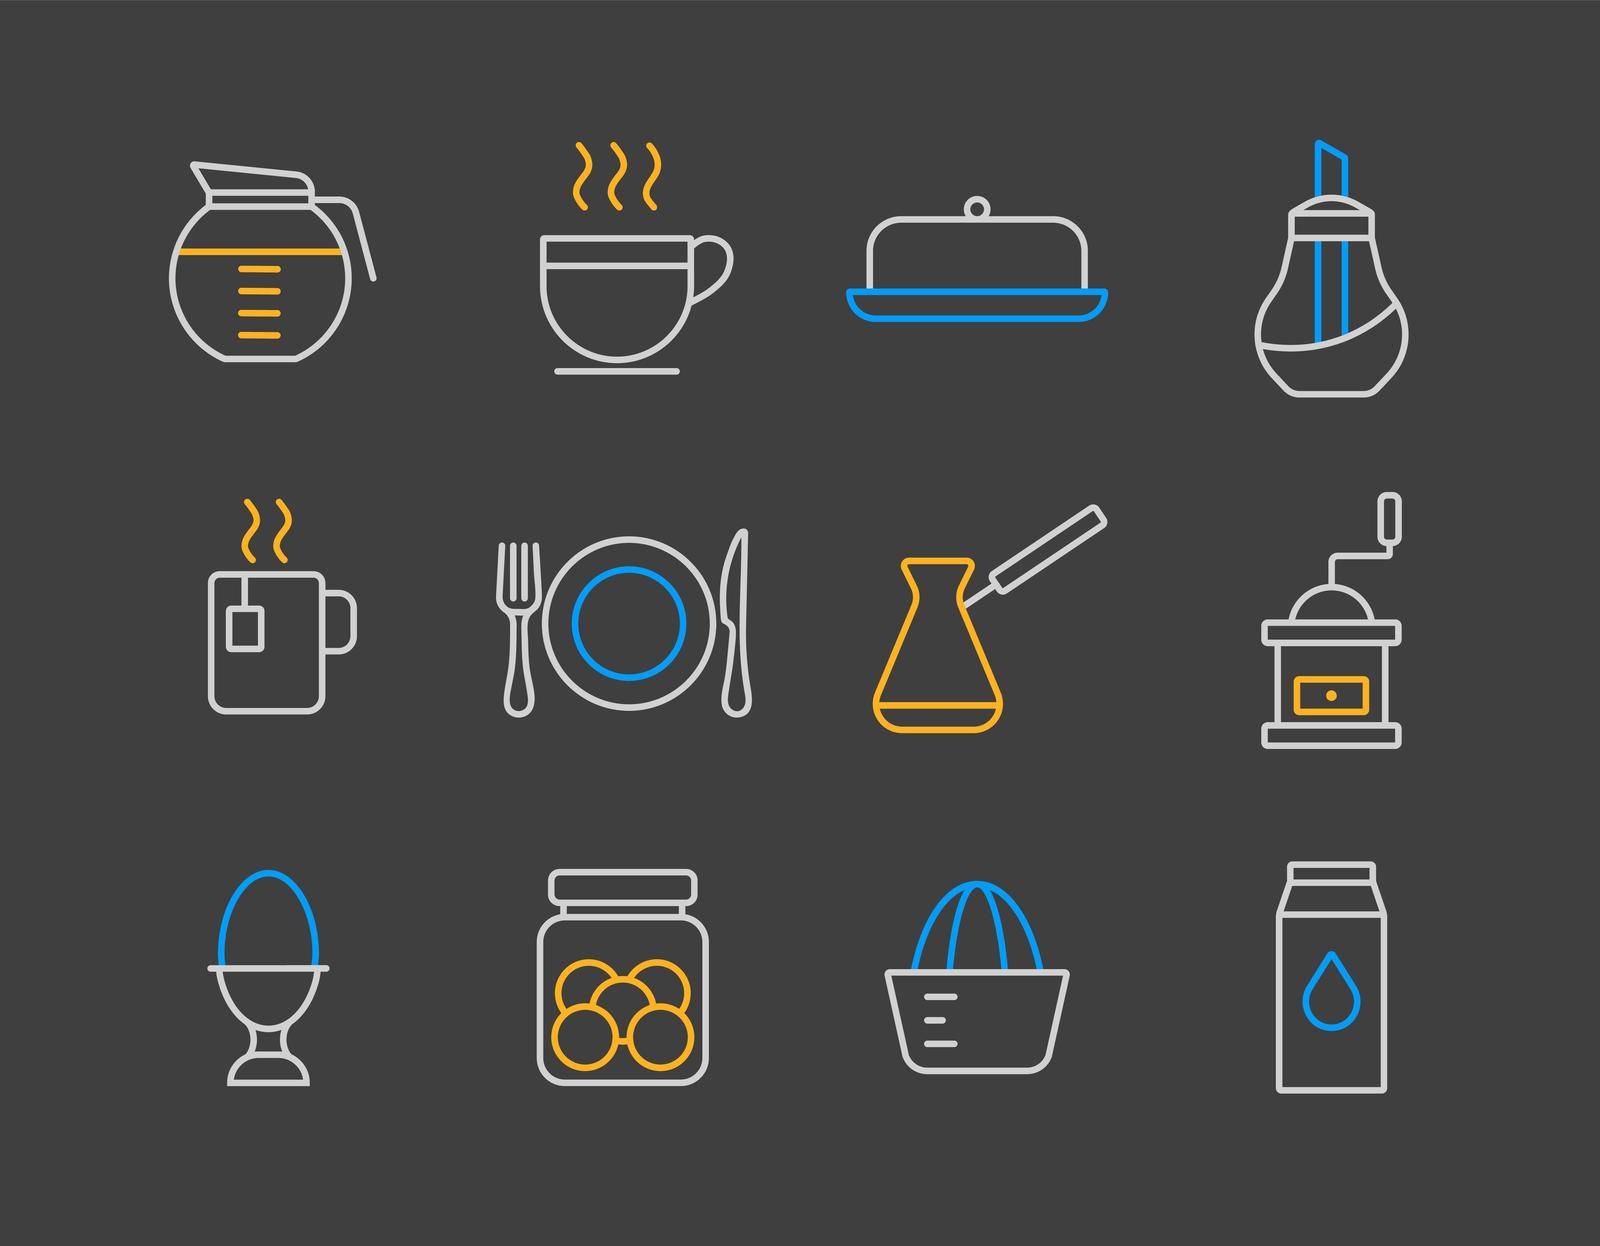 Breakfast and kitchen vector icon set by nosik